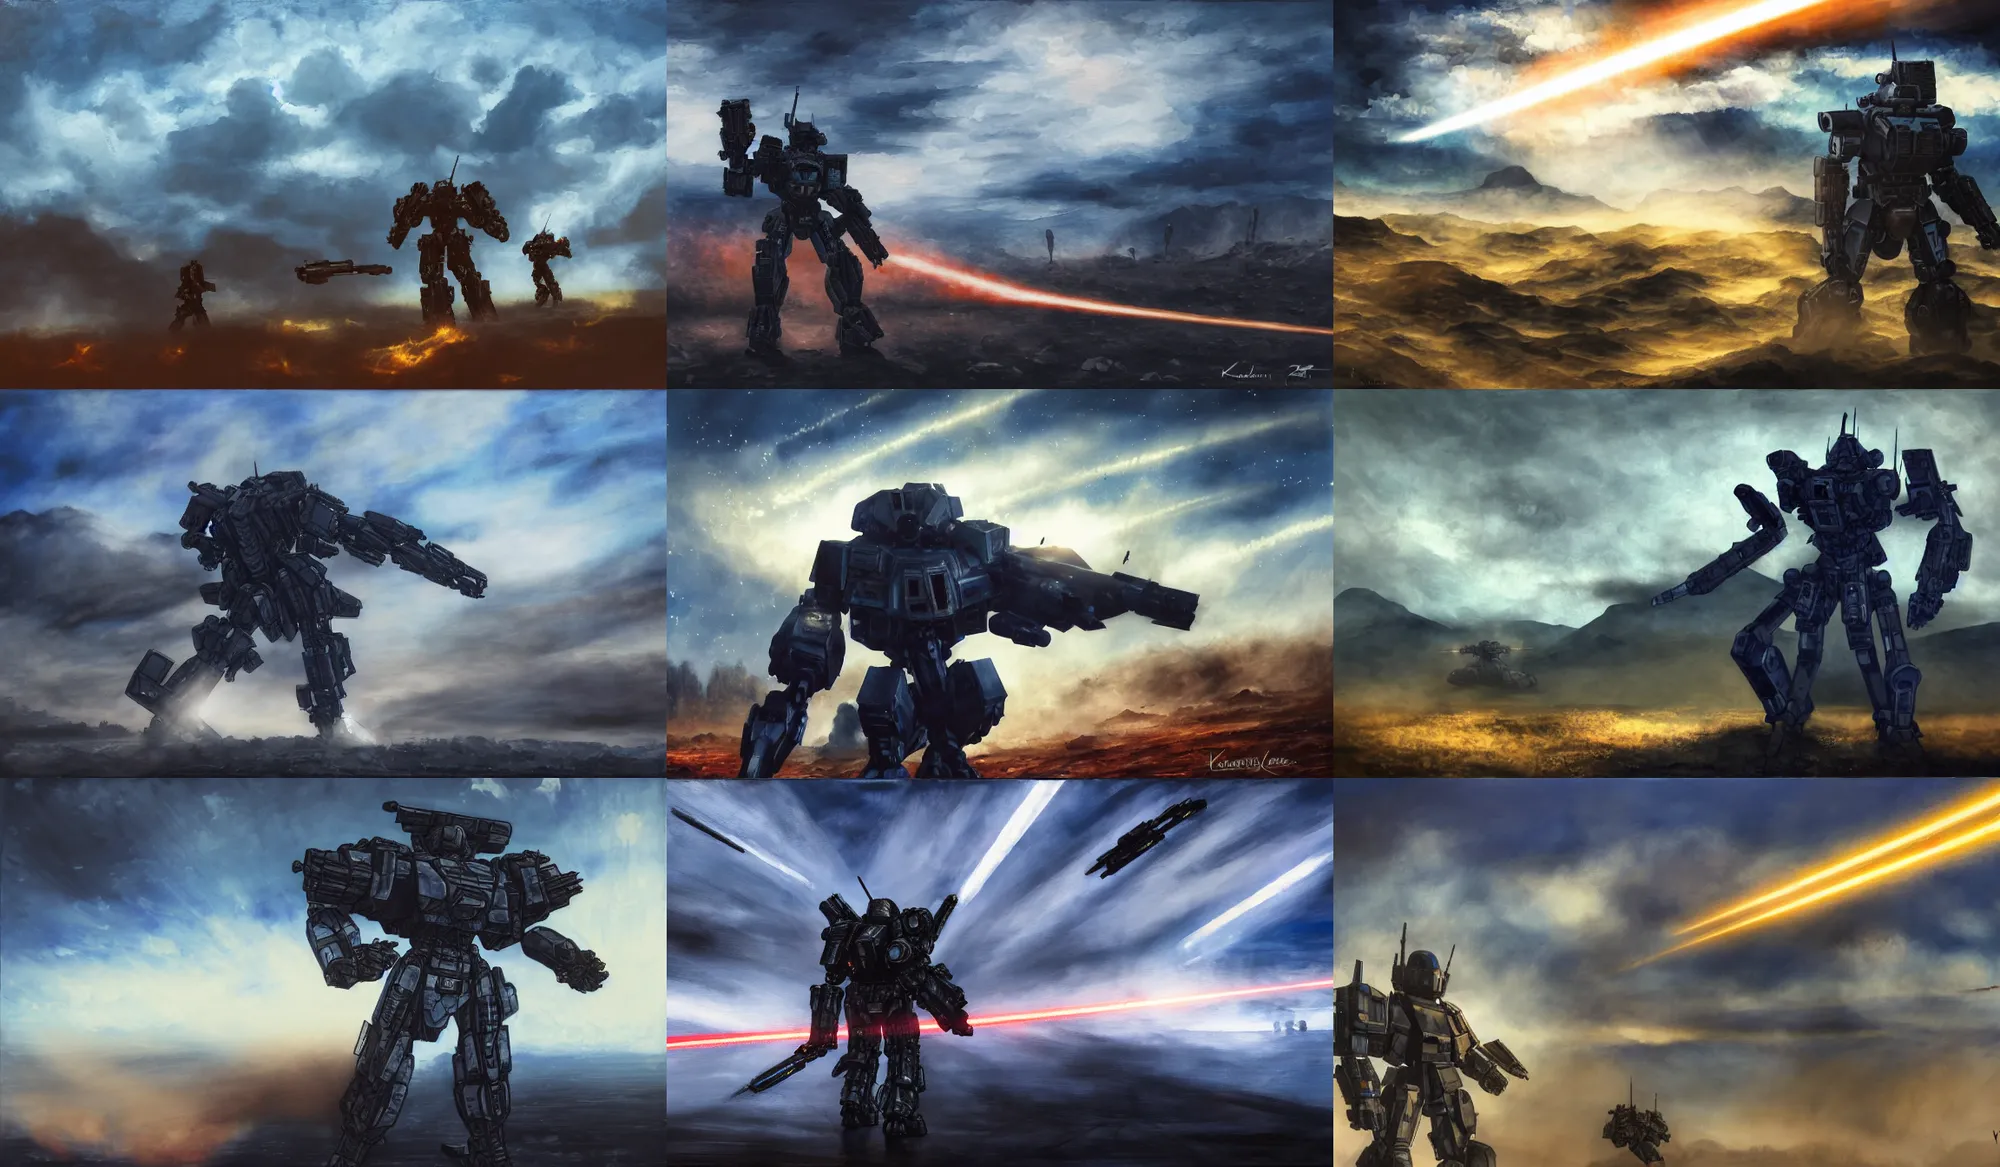 Prompt: an armored core v by kashin, wadim, booster flares, legs, laser rifles, karst landscape, very smoky, dark blue sky, cloud, wilderness ground, golden time, twilight ; wide shot, oil painting, dynamic contrast, dynamic backlighting, sharp edge, motion blur